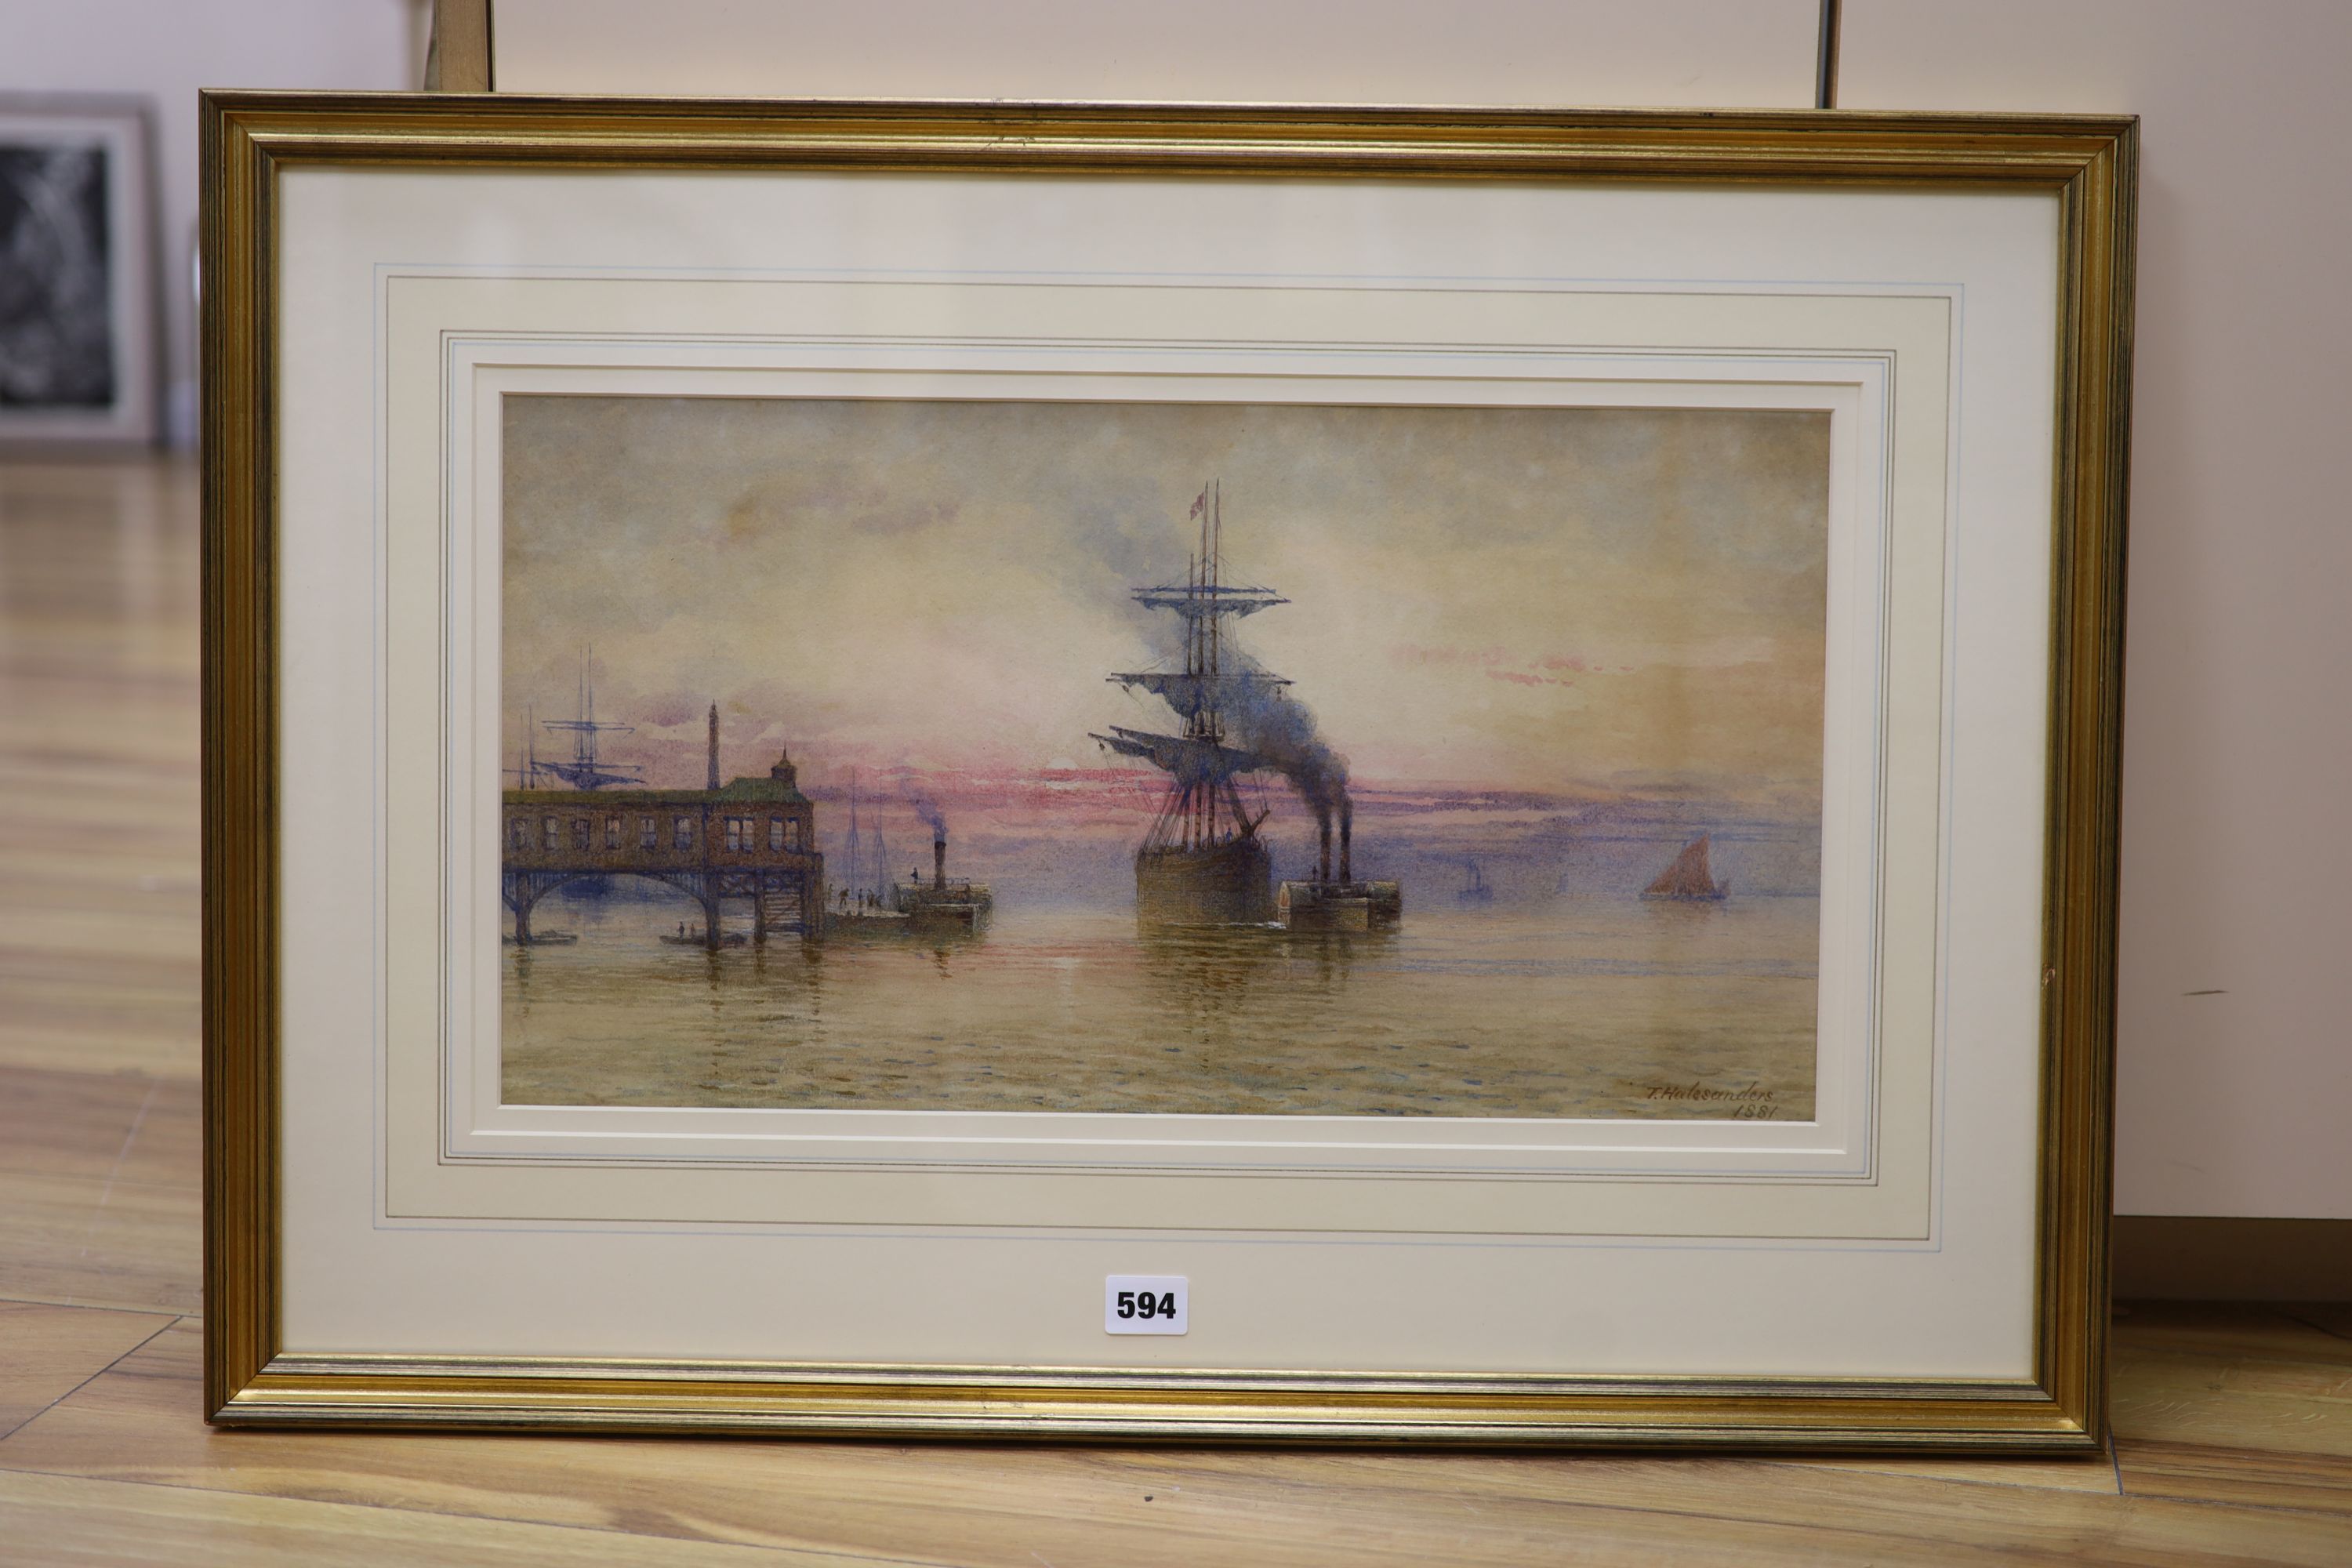 Thomas Hale Sanders (fl.1880-1906), watercolour, ships along the coast, signed and dated 1881, 27 x 50cm